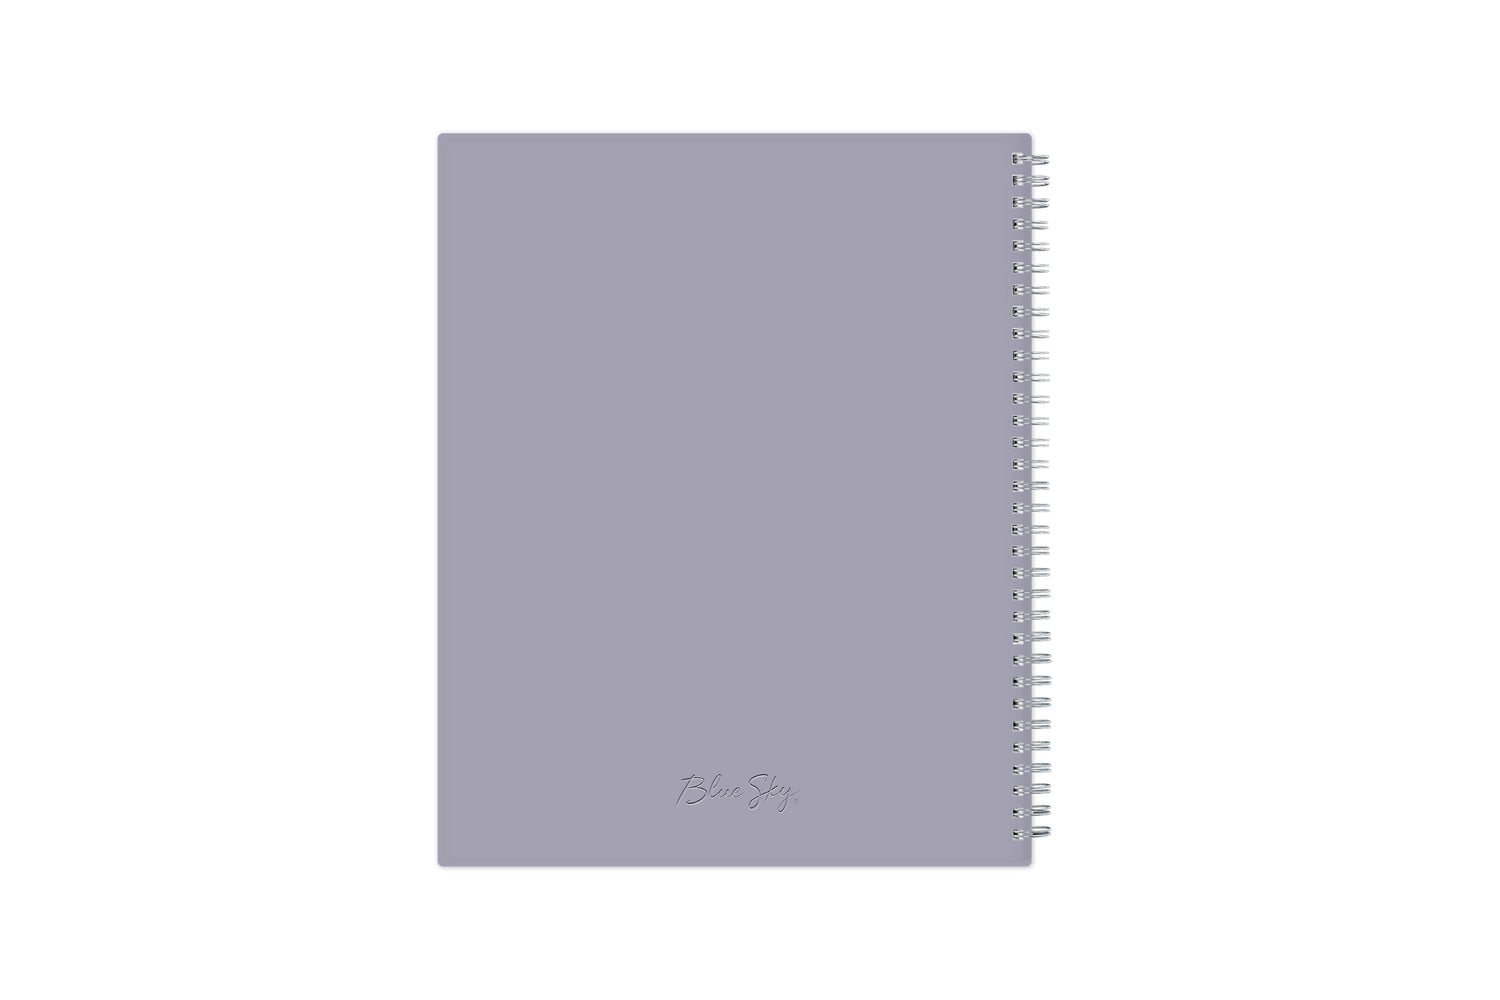 January 2023 to December 2023 weekly planner featuring a solid flexible light purple back cover, silver twin wire-o, and a compact 8.5x11 size planner